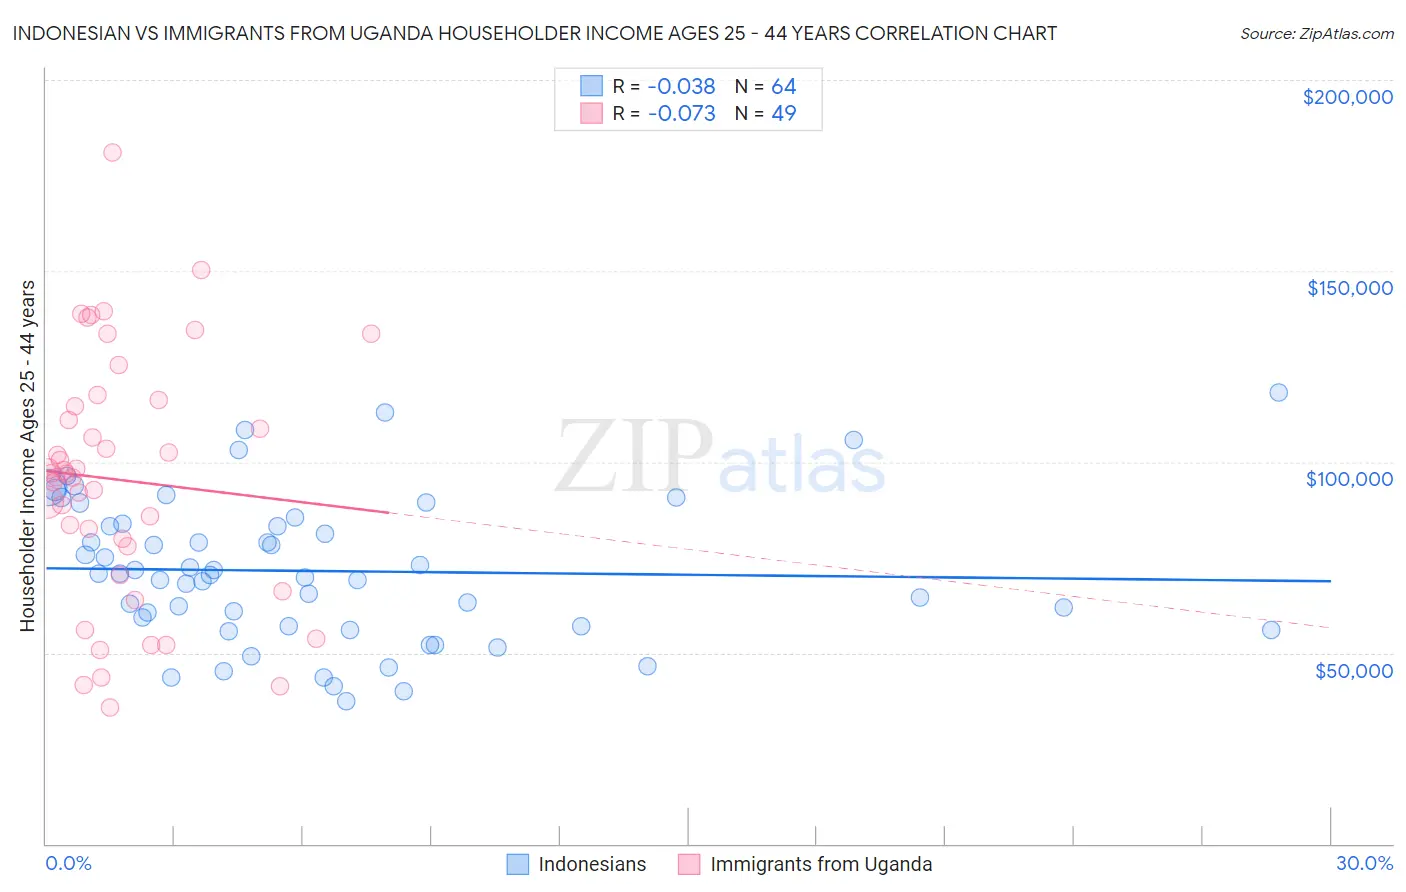 Indonesian vs Immigrants from Uganda Householder Income Ages 25 - 44 years